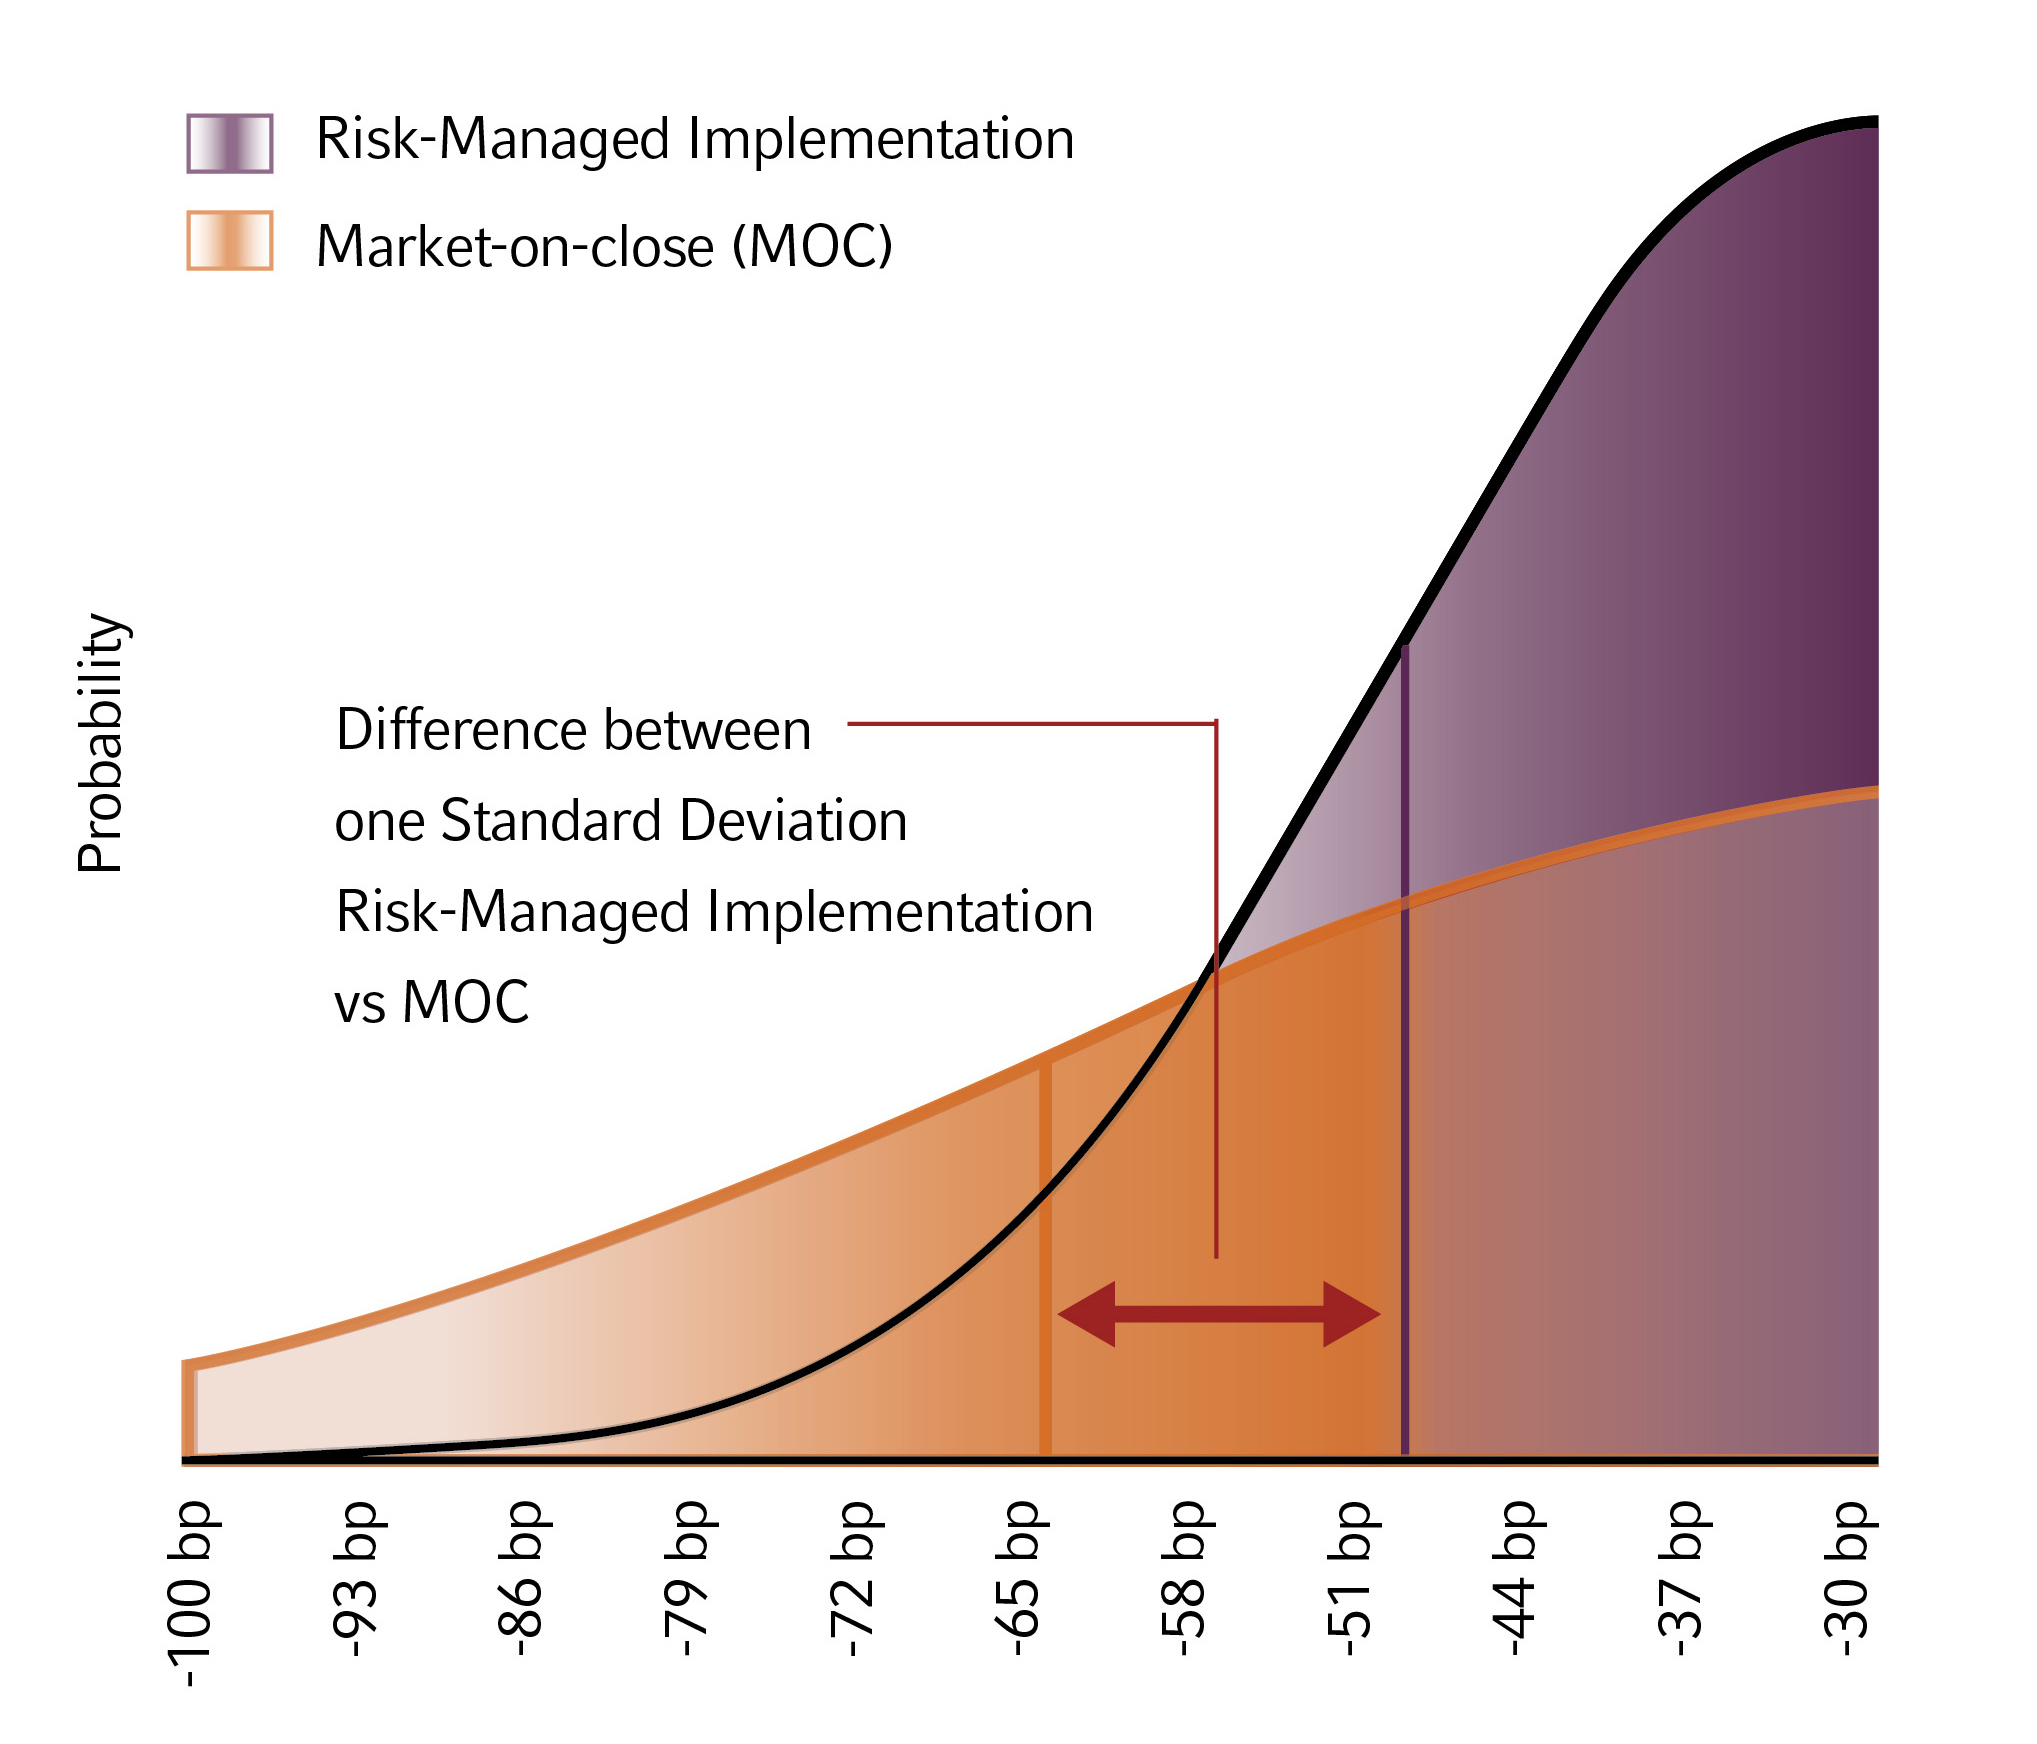 A chart showing how the T-Standard implementation shortfall with the difference between one standard deviation, risk-managed implementation vs. market-on-close